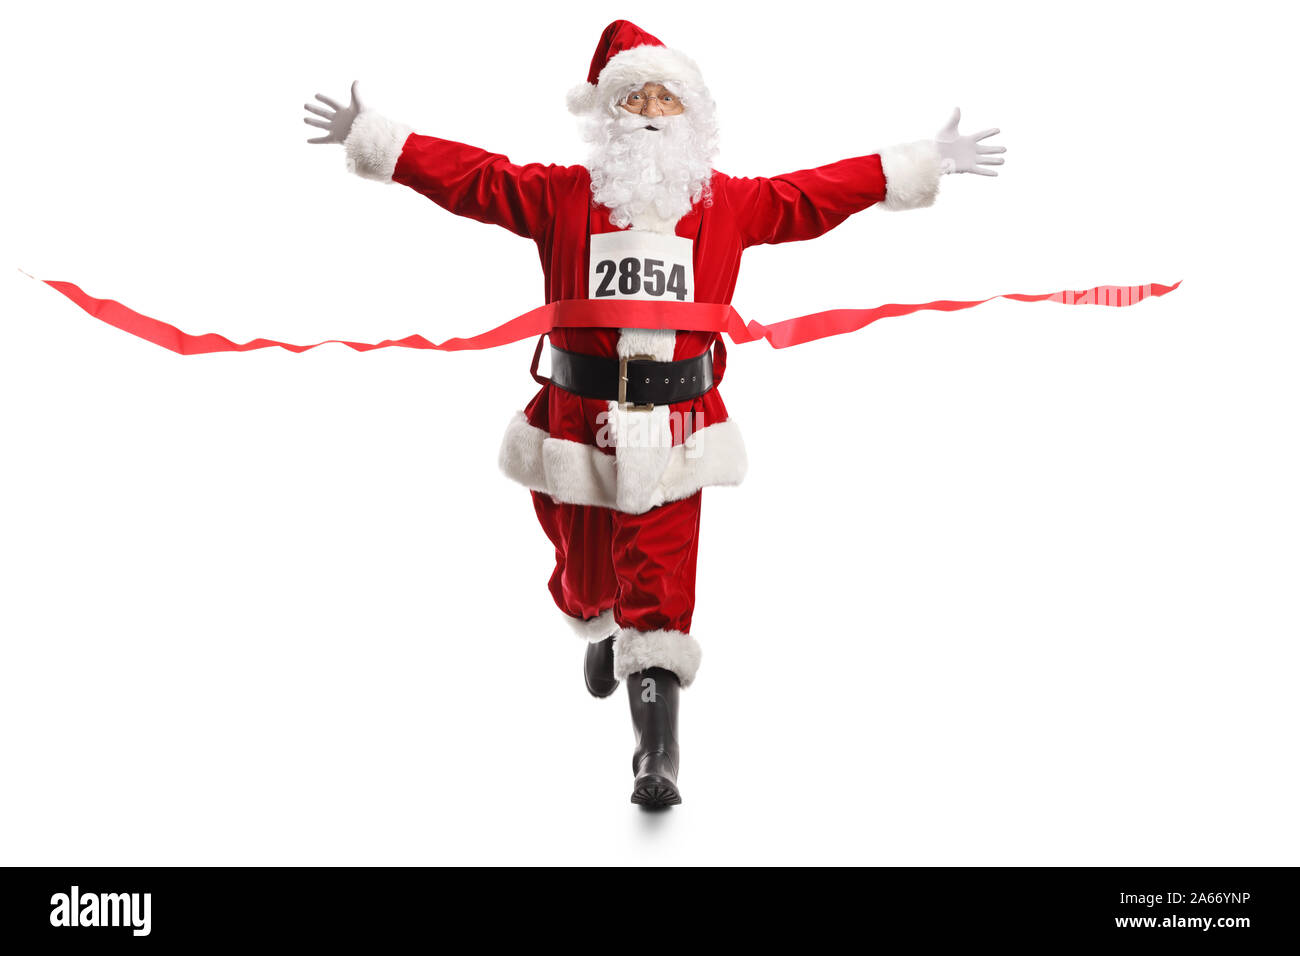 Full length portrait of Santa Claus on the finish line of a race isolated on white background Stock Photo